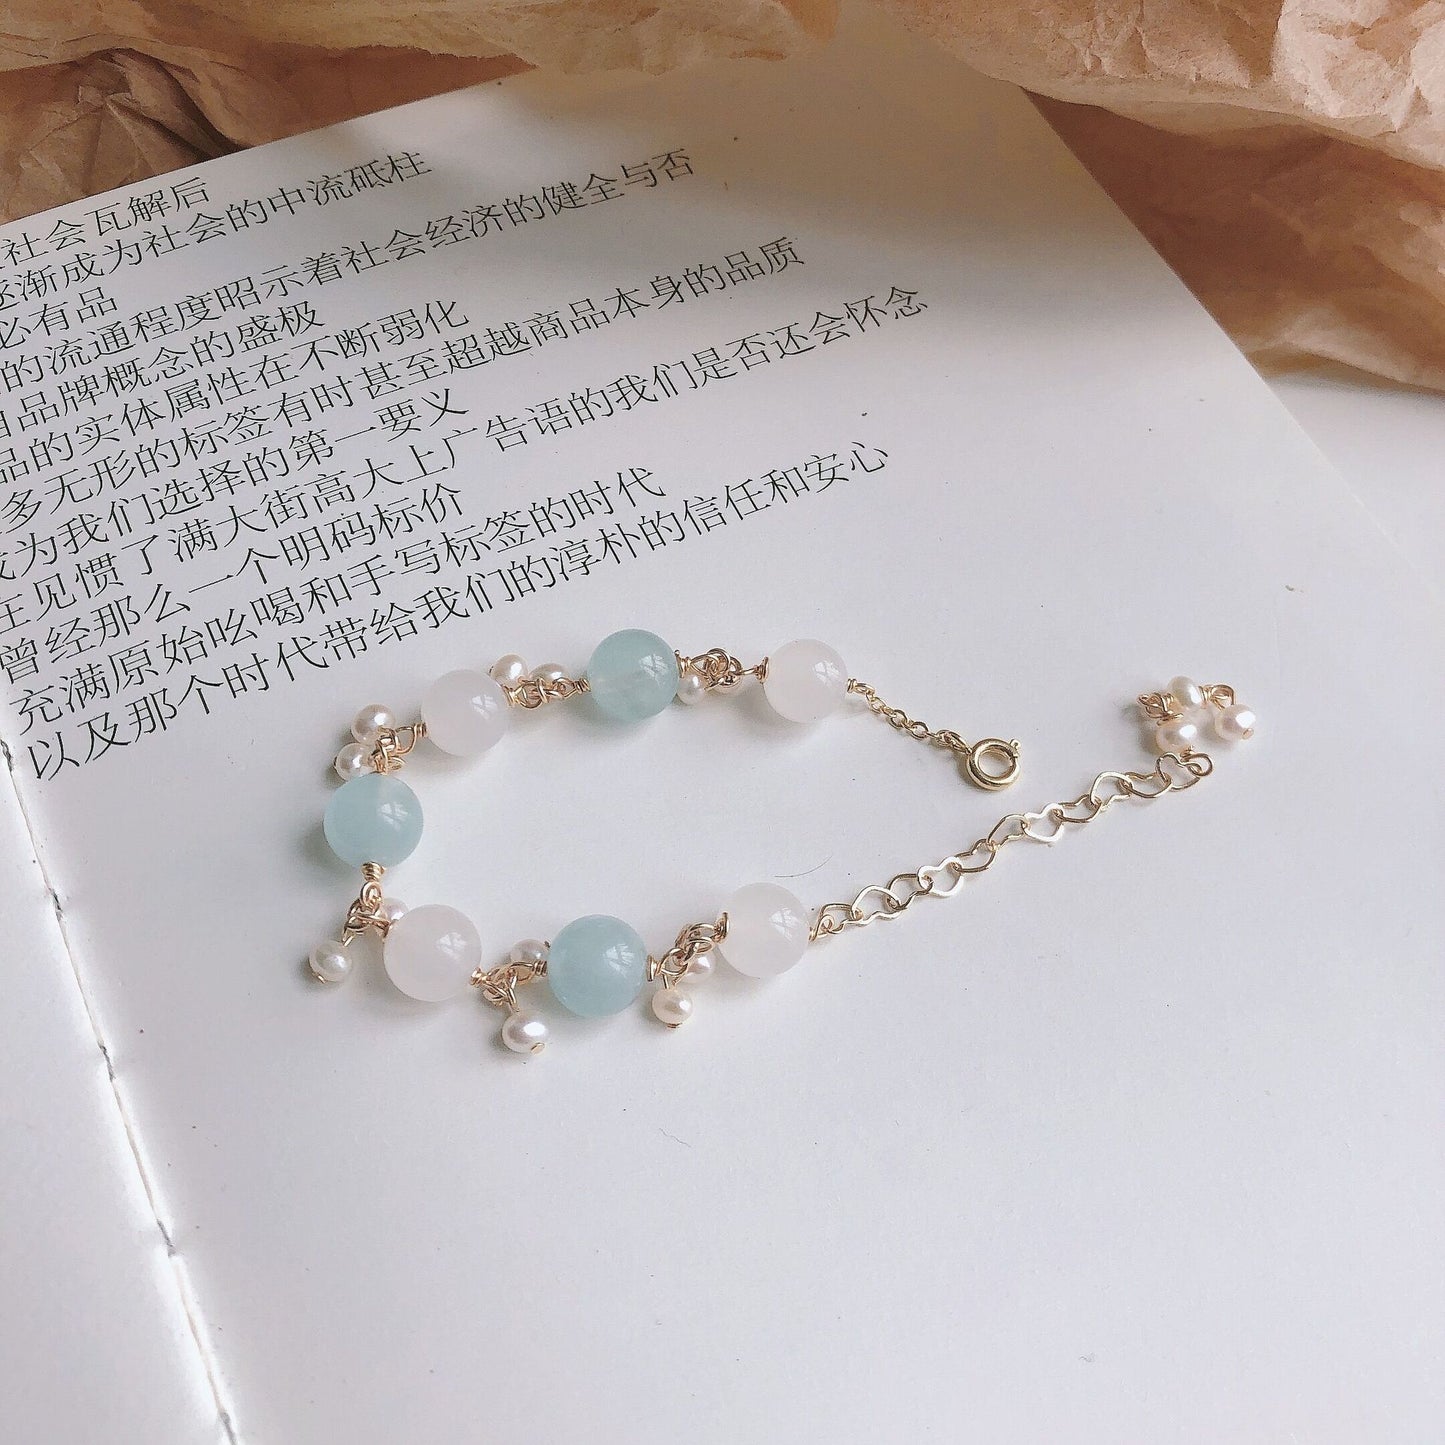 A book with a Clear Quartz Aquamarine Bracelet from Maramalive™ on it next to a glass of water.